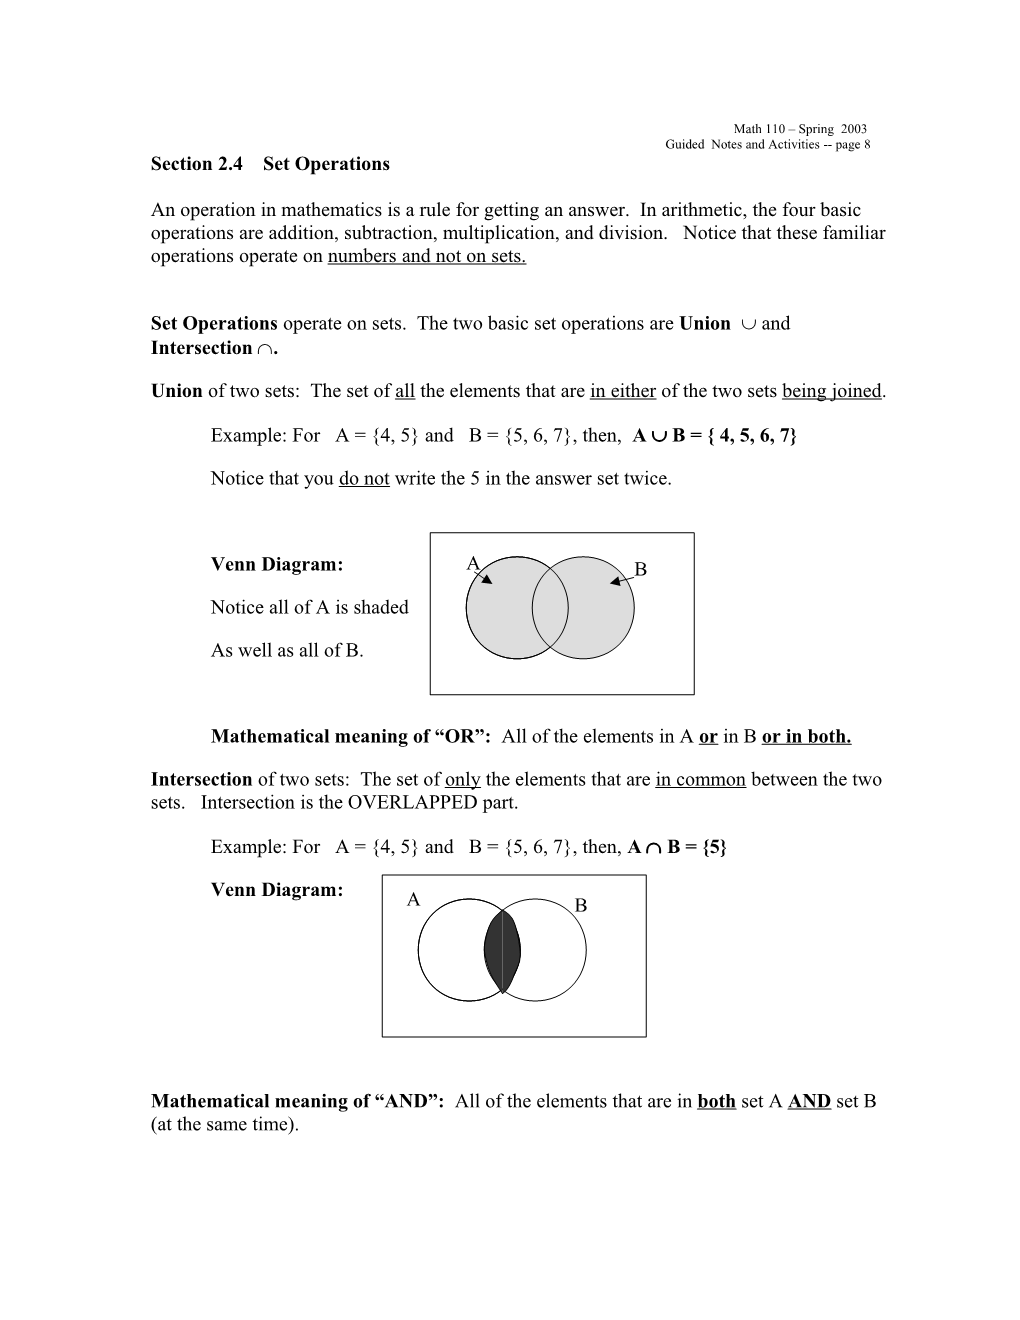 Guided Notes and Activities Page 8